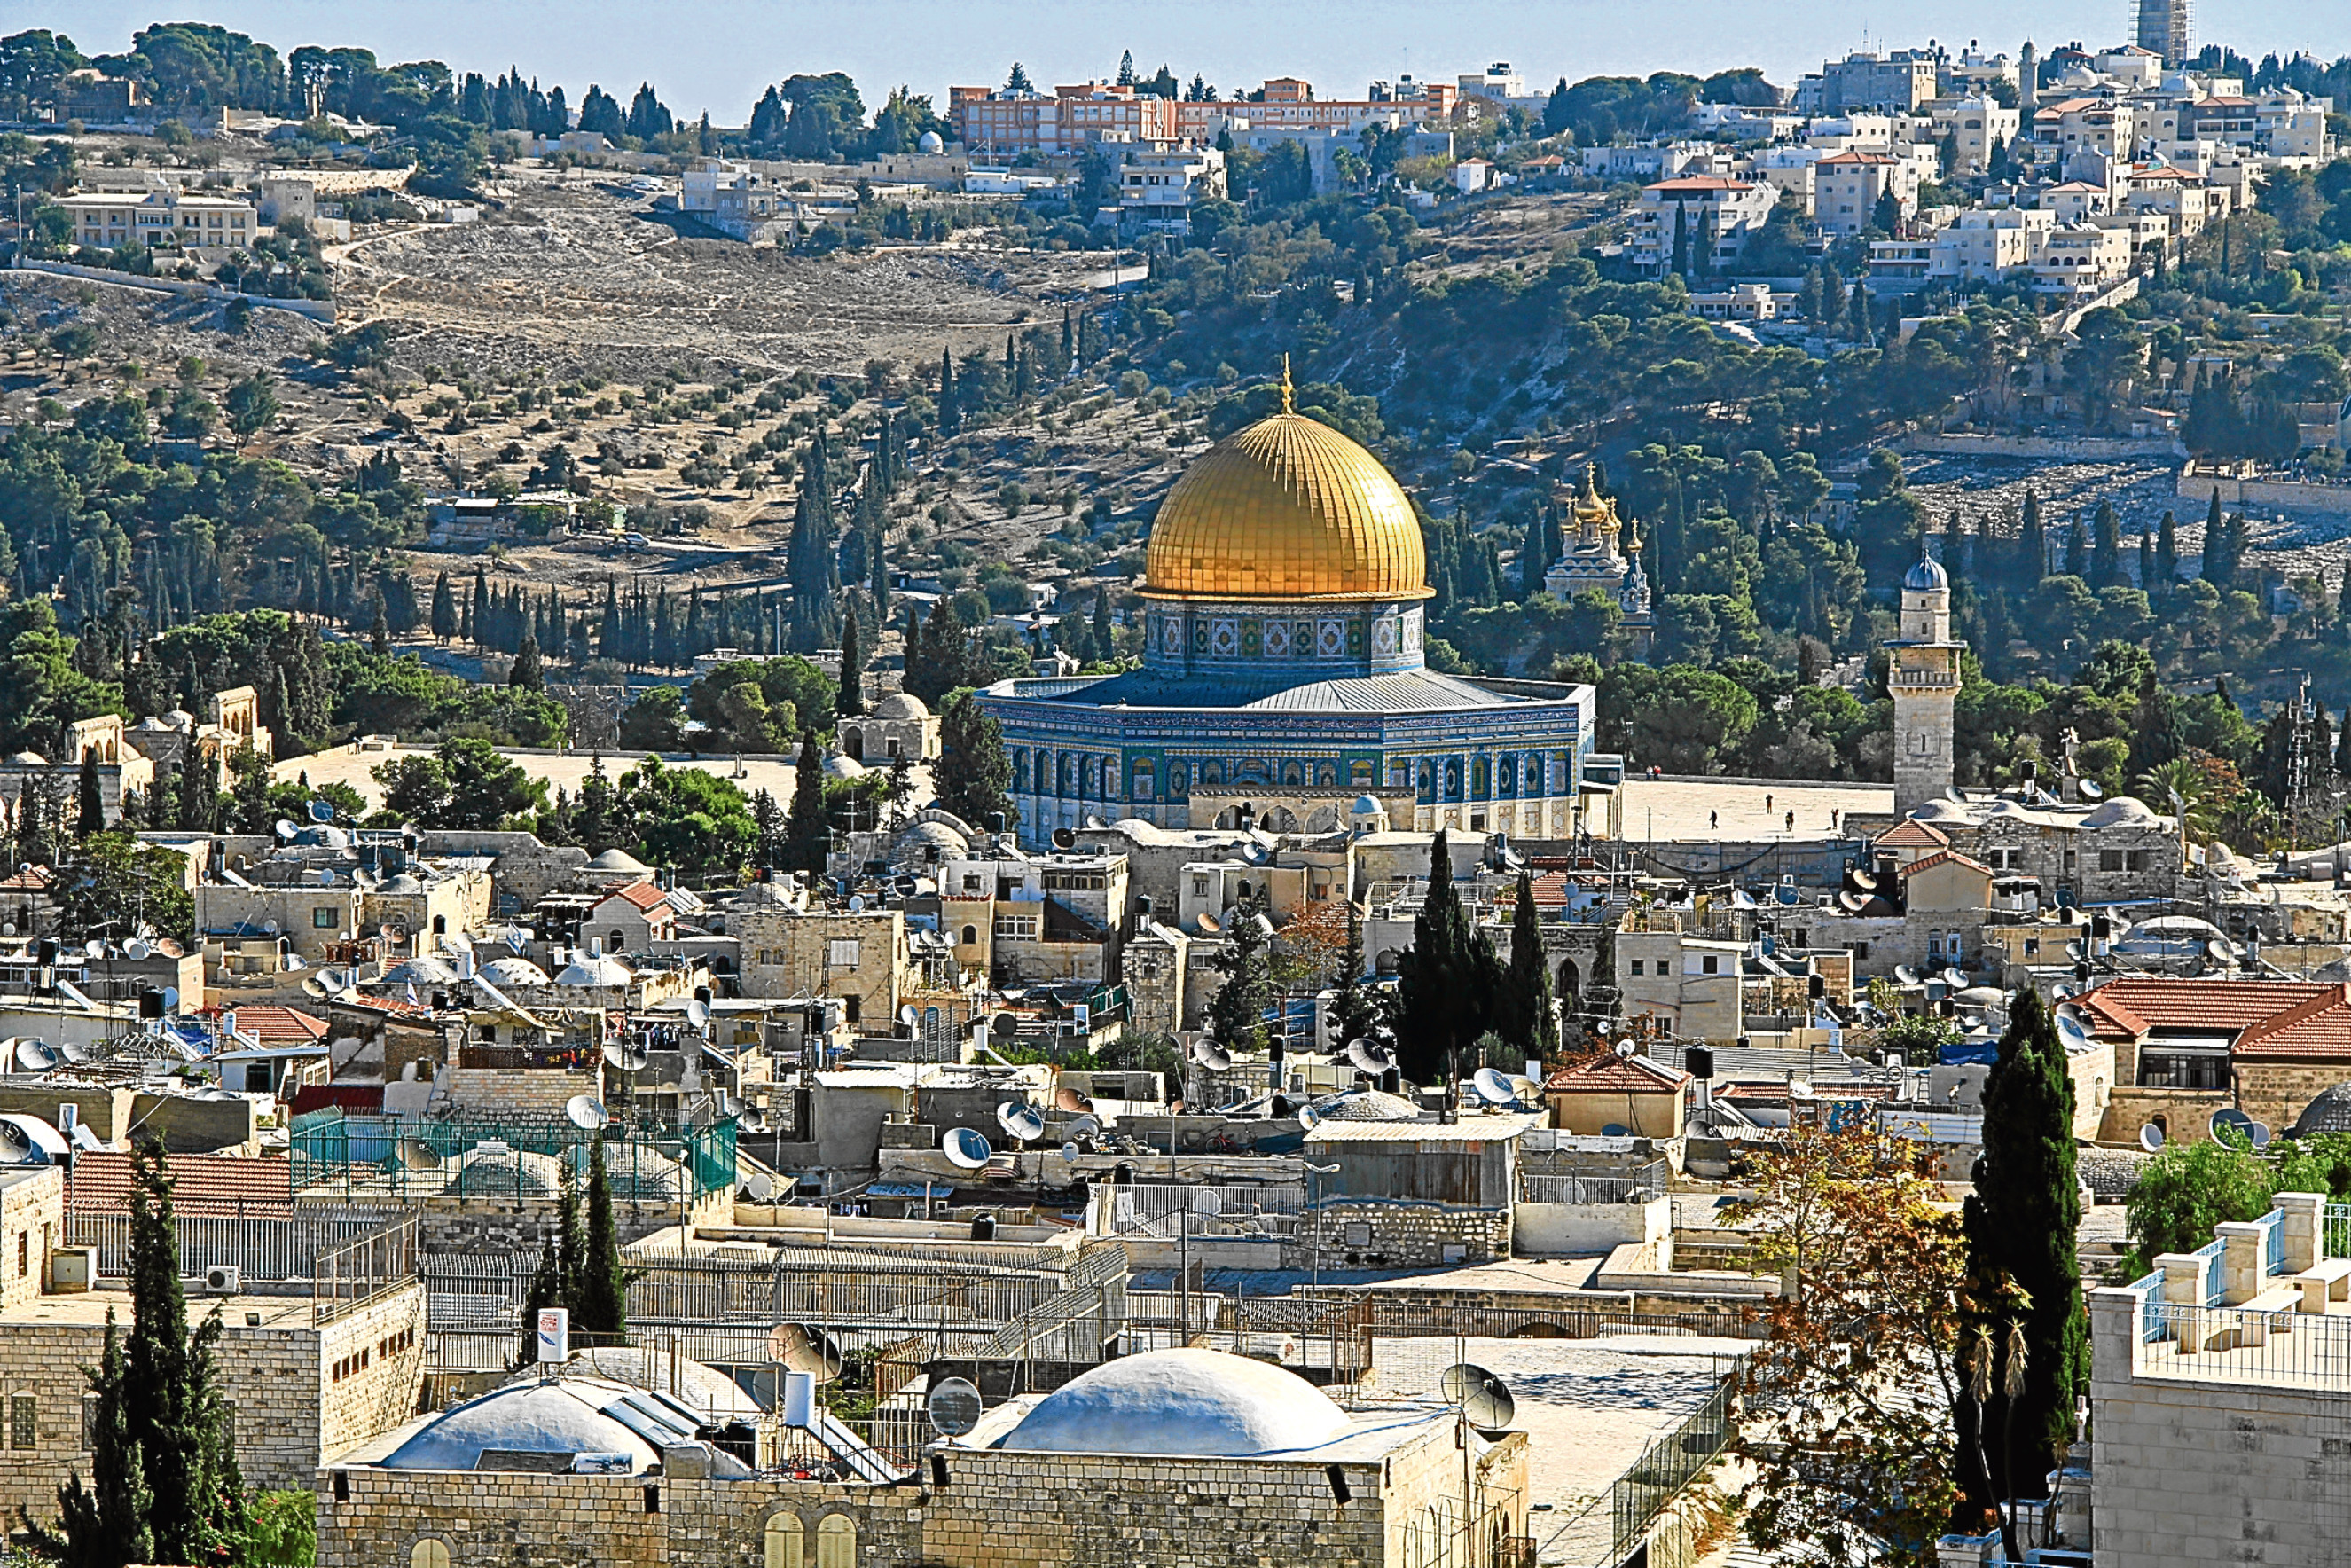 The Dome of the Rock, on the Temple Mount in Jerusalem, is a stunning edifice (Linda Johnsonbaugh / Getty Images)